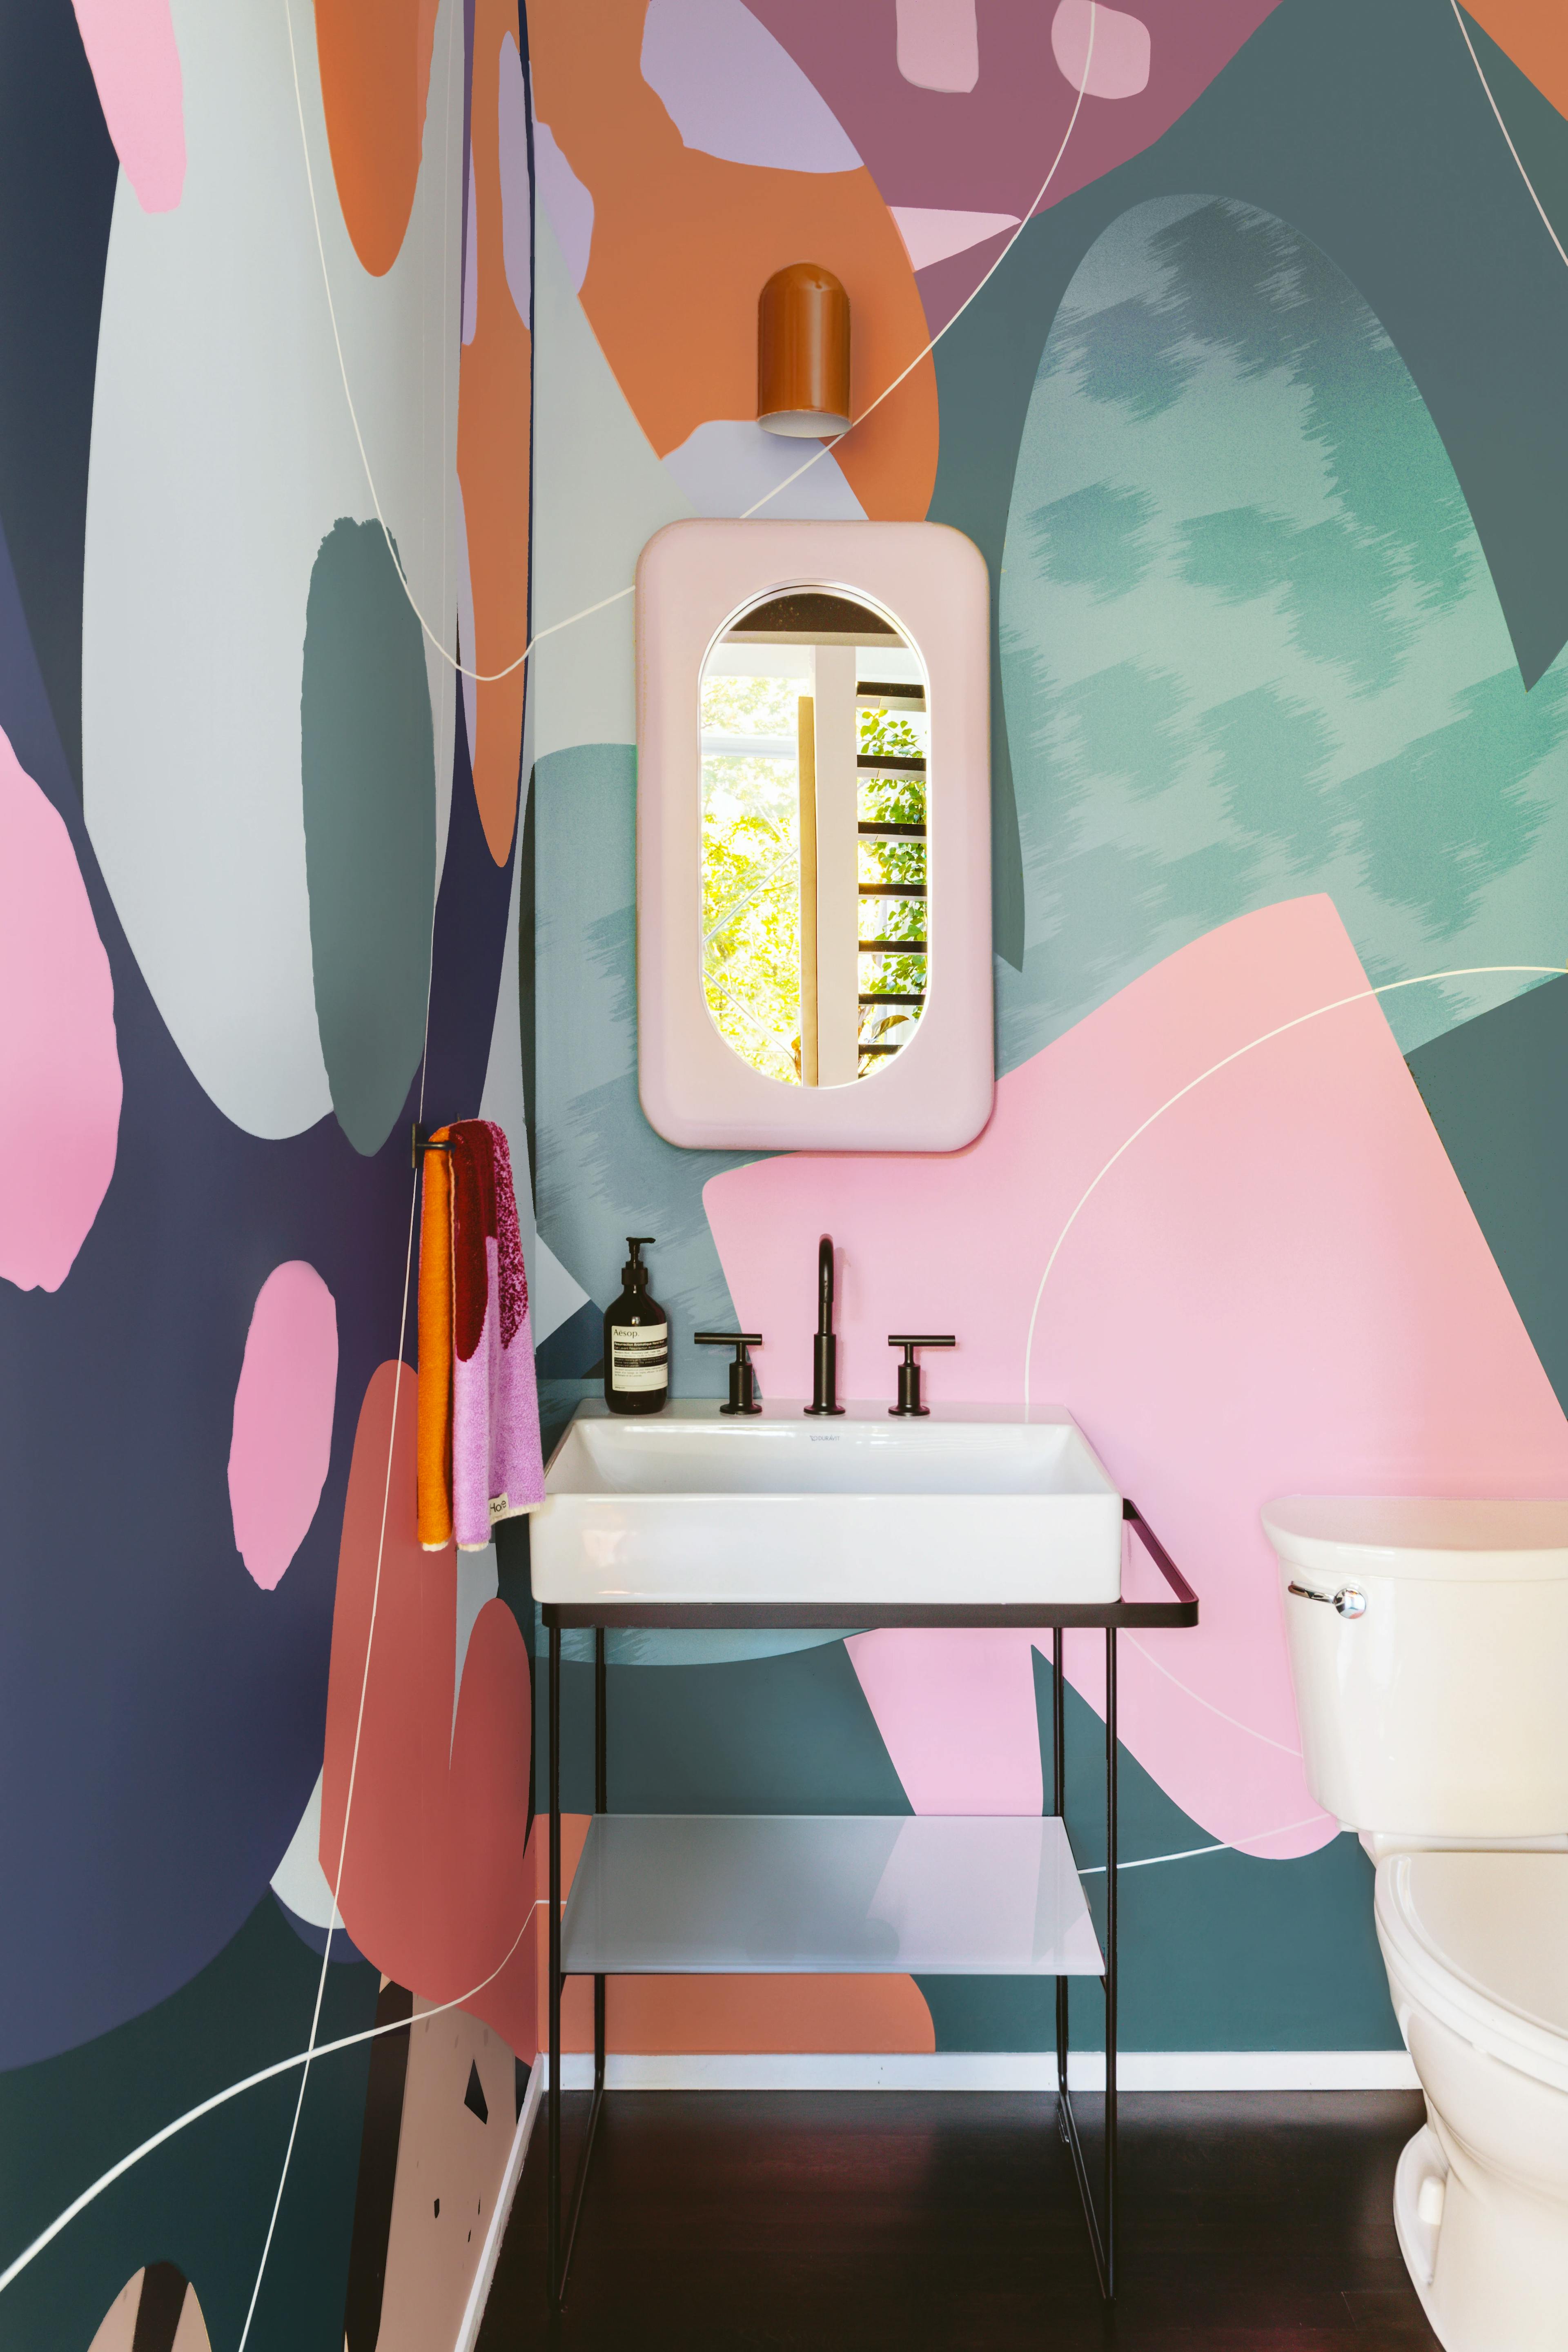 A colorful wall mural by artist Alex Proba in her bathroom. 